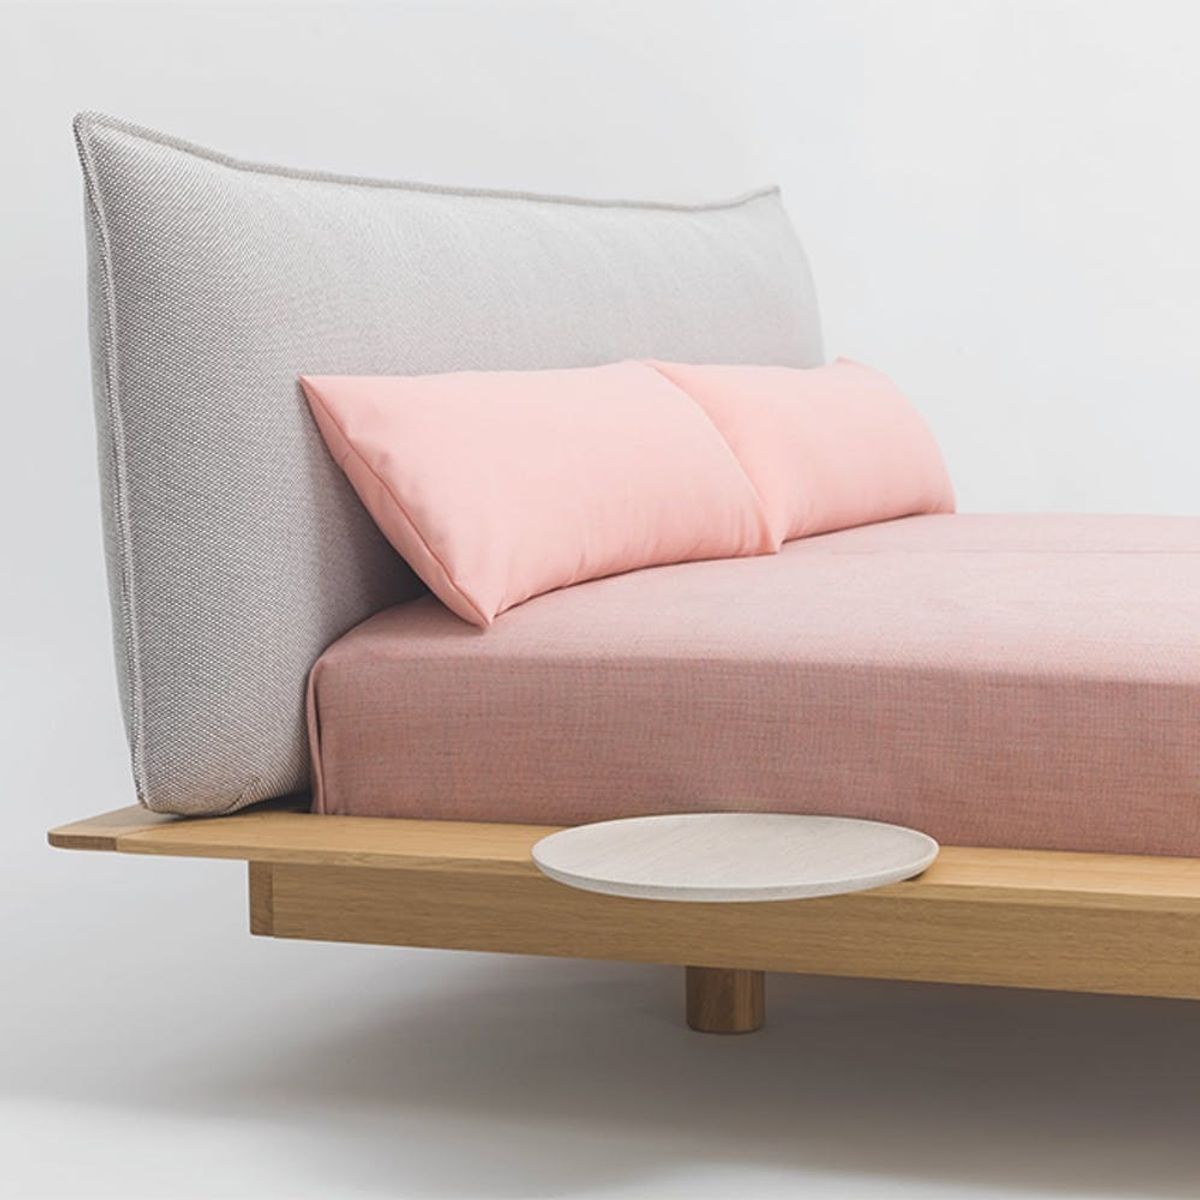 This Floating Bed Will Make All of Your Decor Dreams Come True